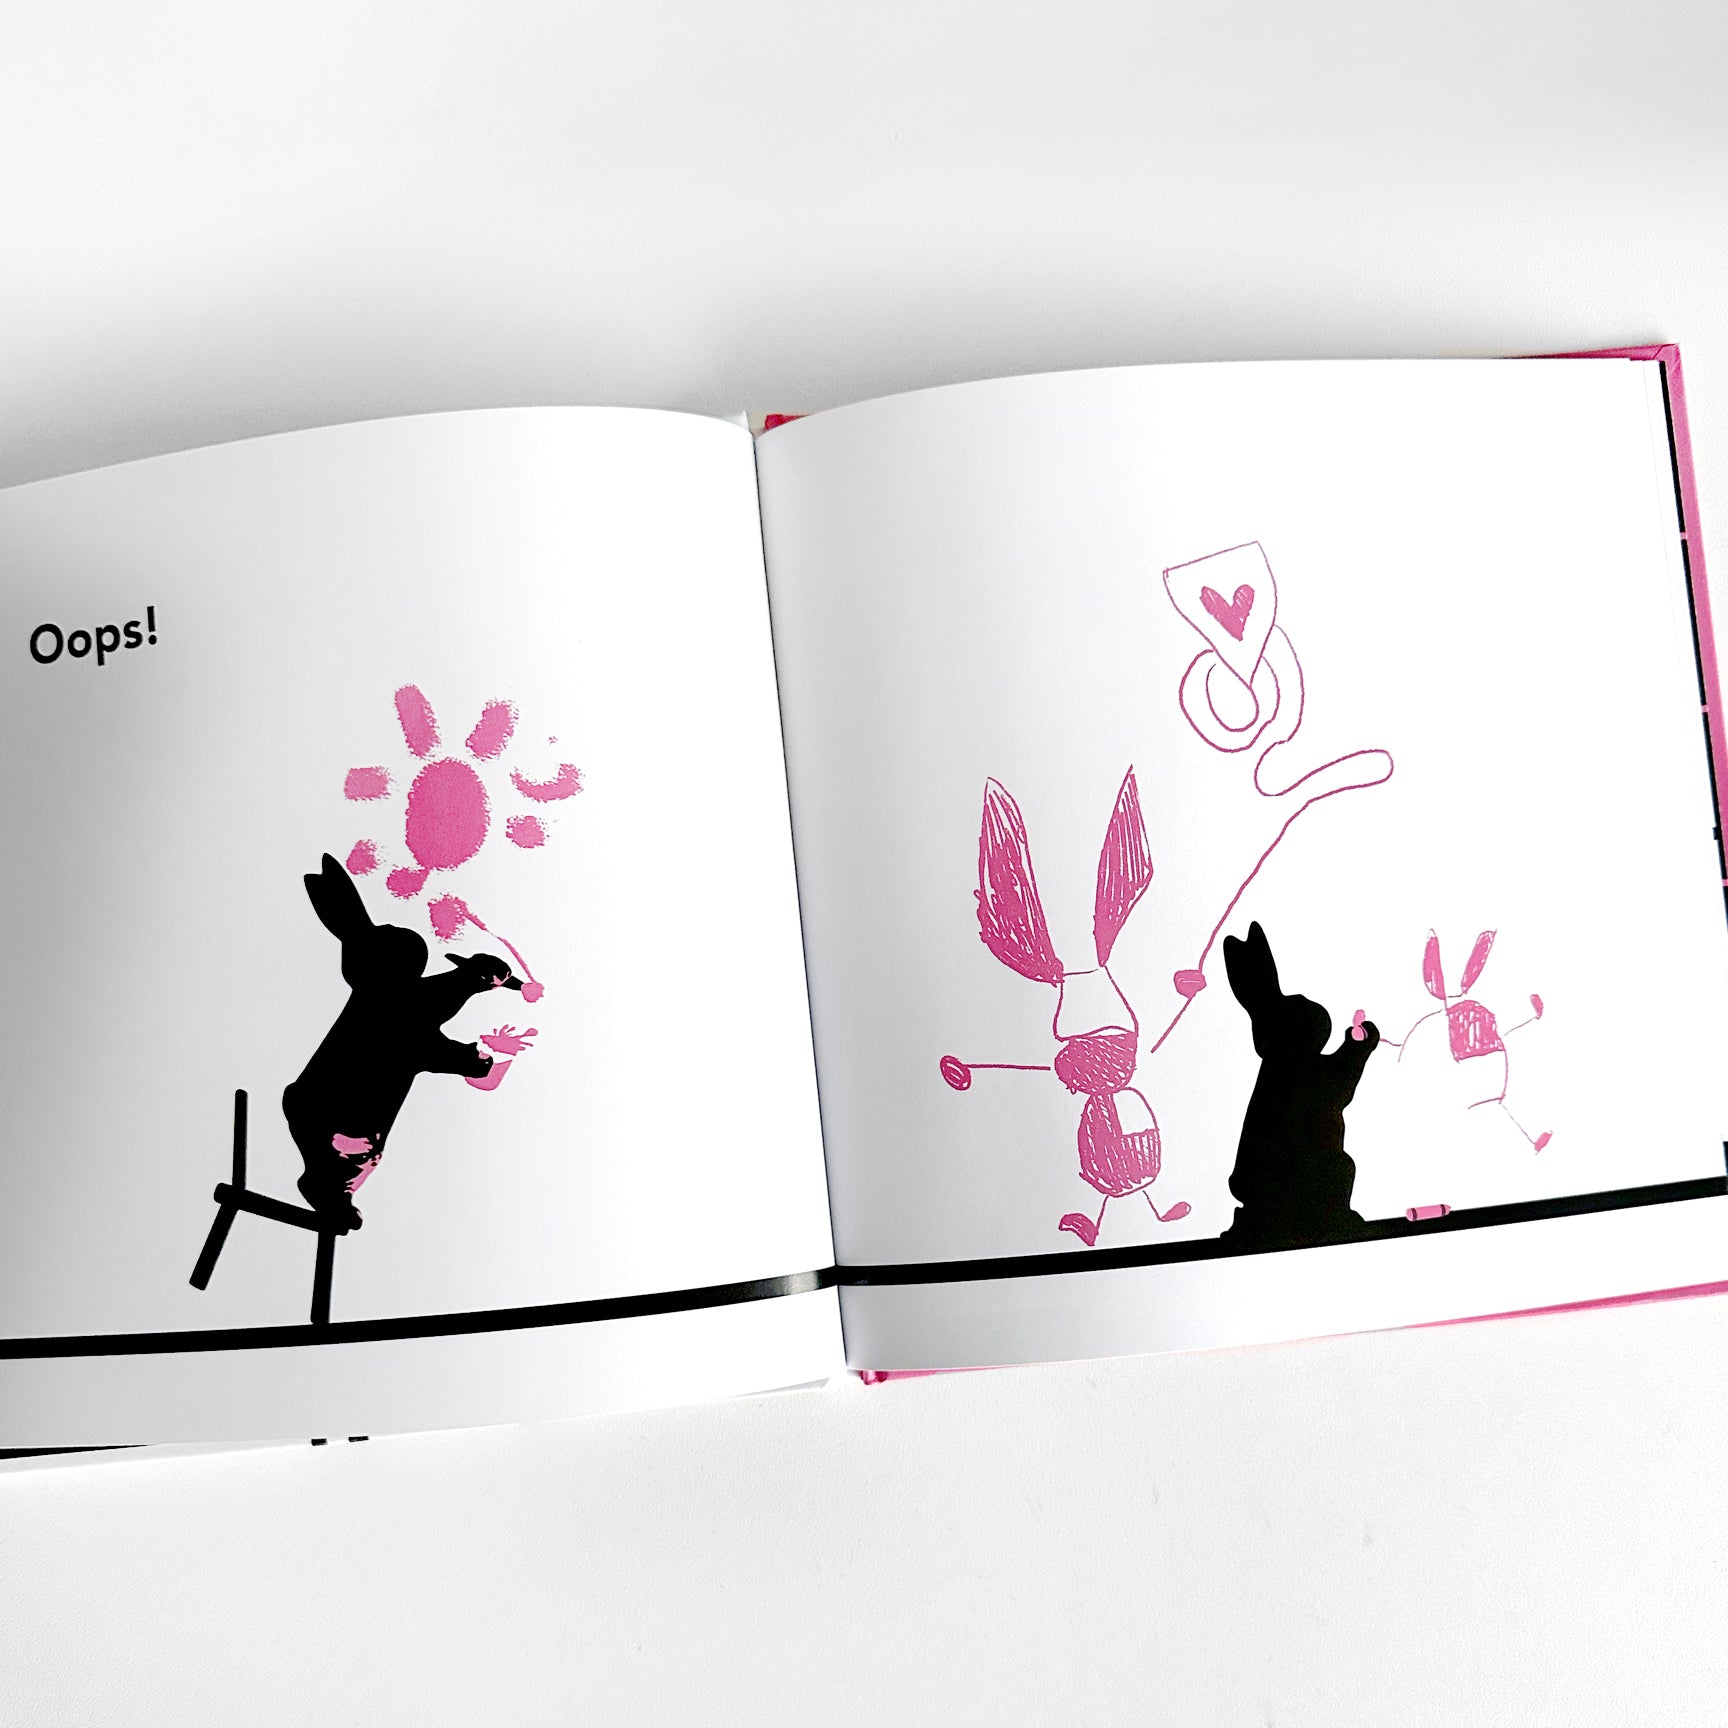 Oops! Rabbit Book - Signed Copy